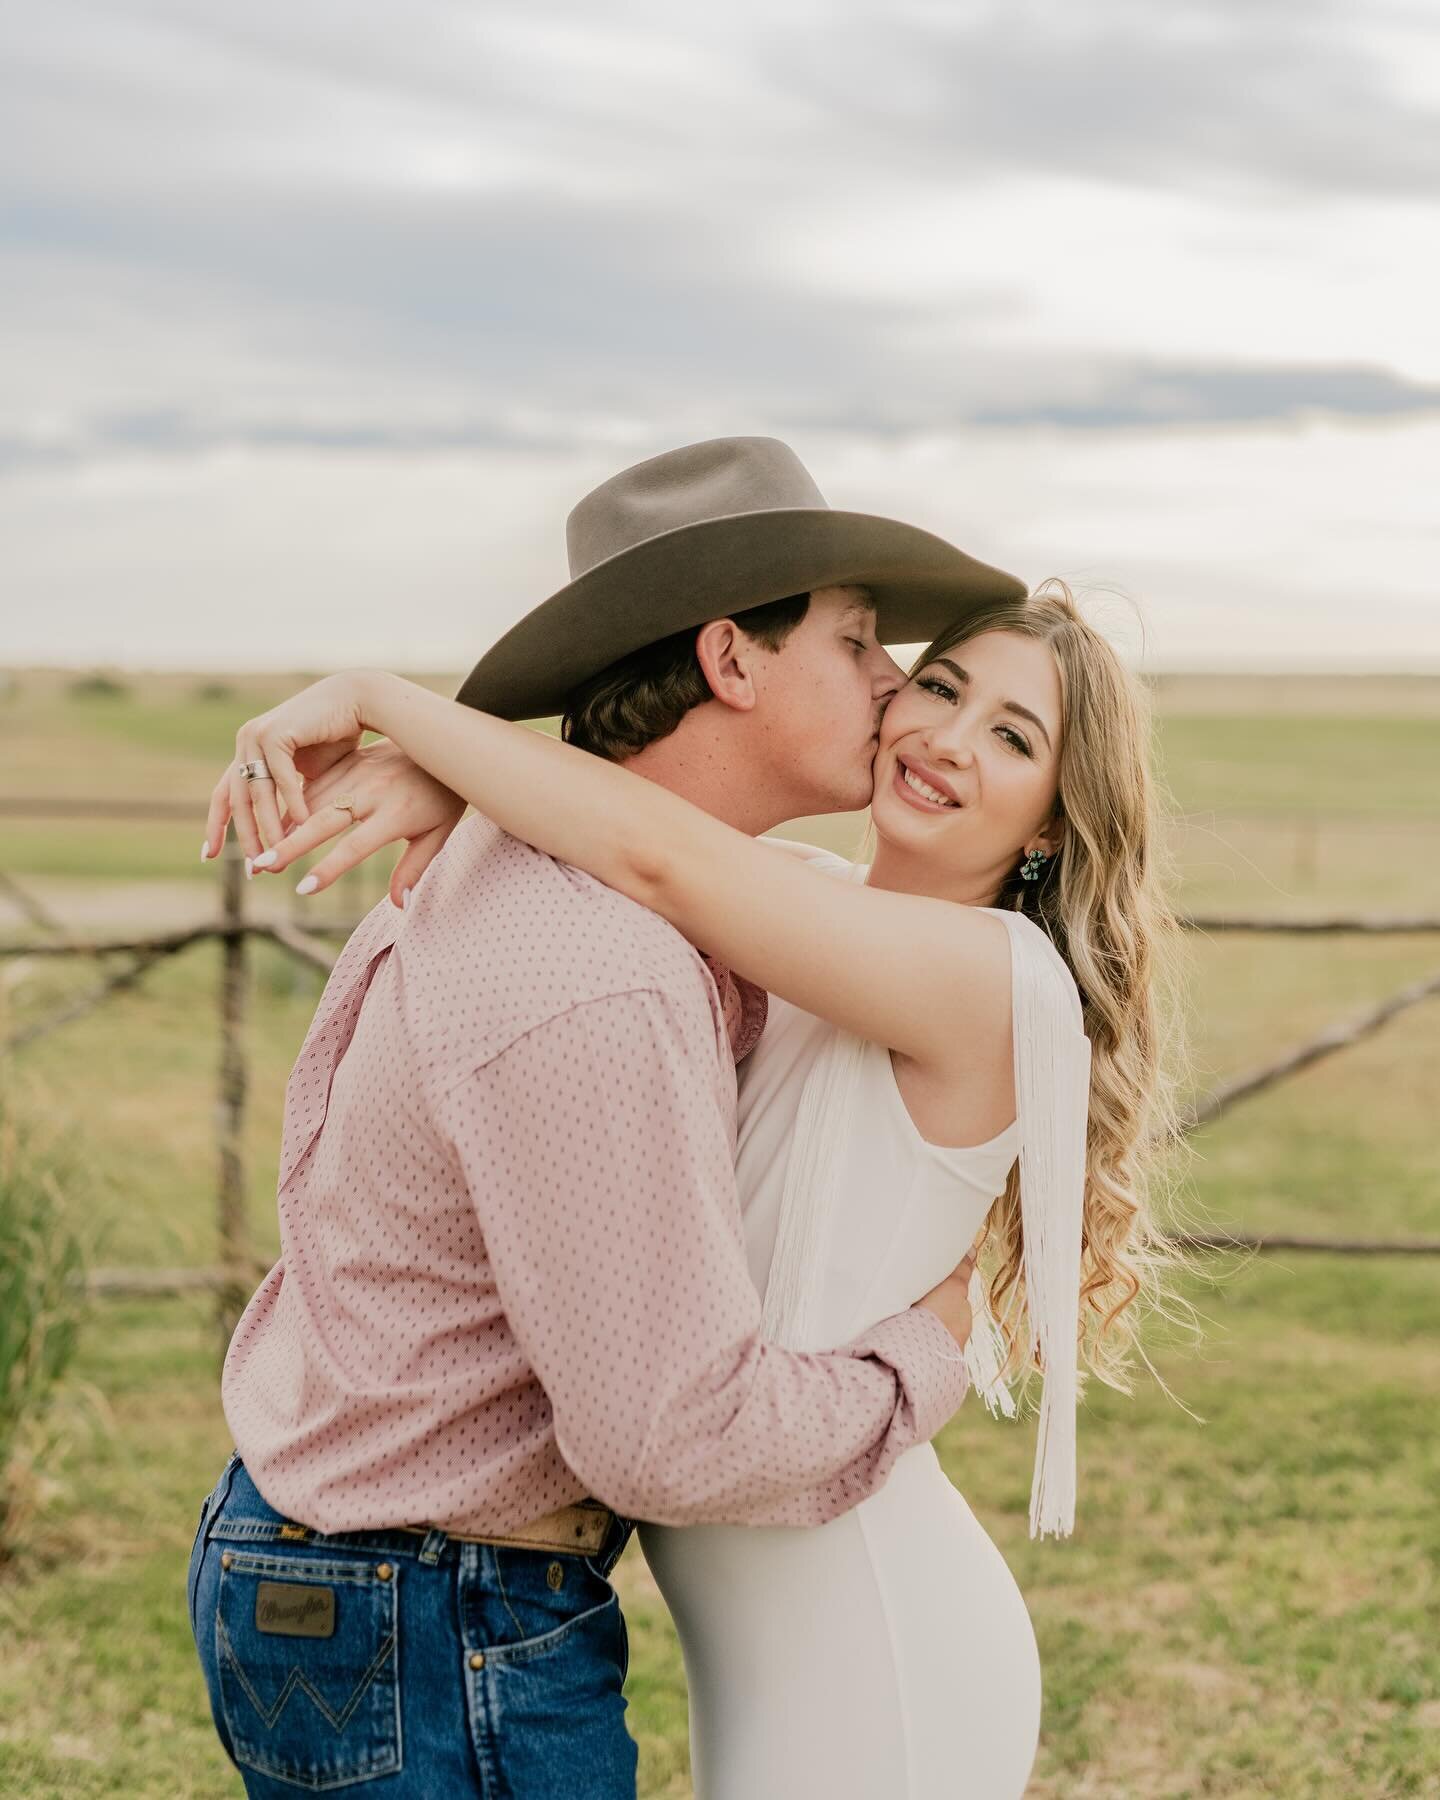 Camron &amp; Kiley ✨
.
I&rsquo;m still obsessed with their engagement photos from last fall! It was such a perfect evening at their venue! Absolutely can&rsquo;t wait to celebrate you two come August!! 🫶🏼
.
.
.
.
.
.
.
.
#texasengagementphotographe